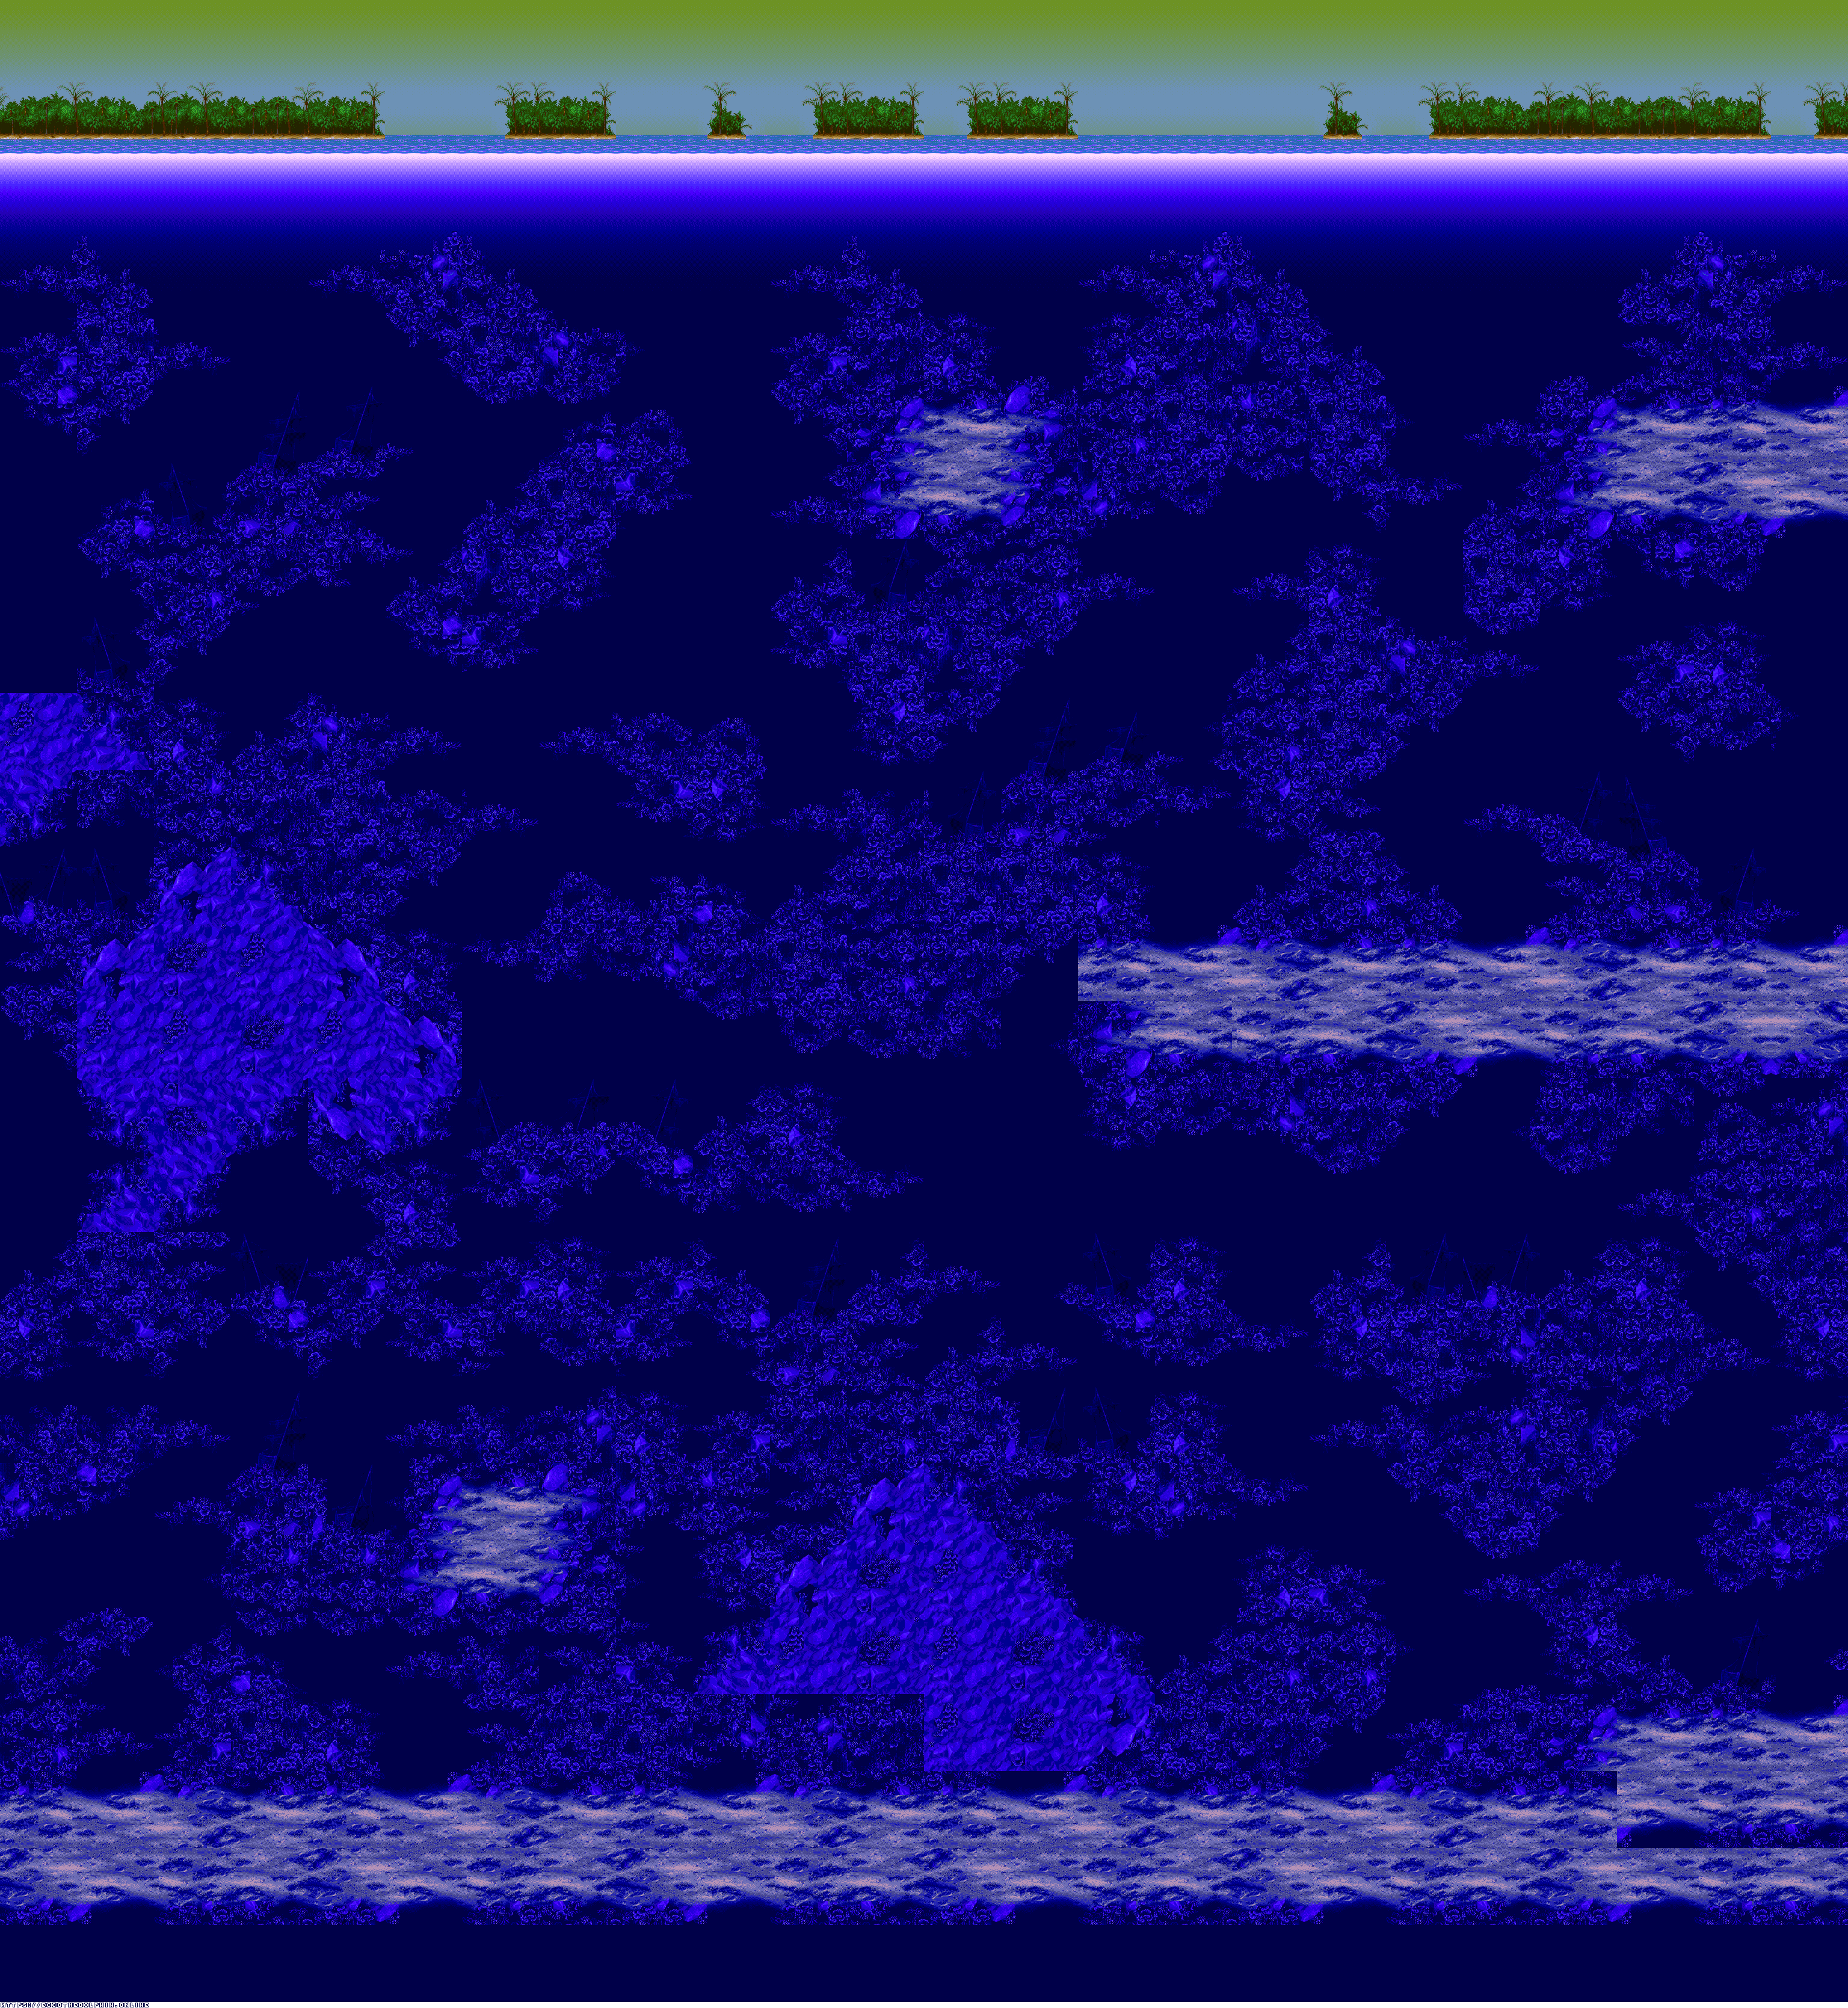 Ecco: The Tides of Time - Four Islands (Background)